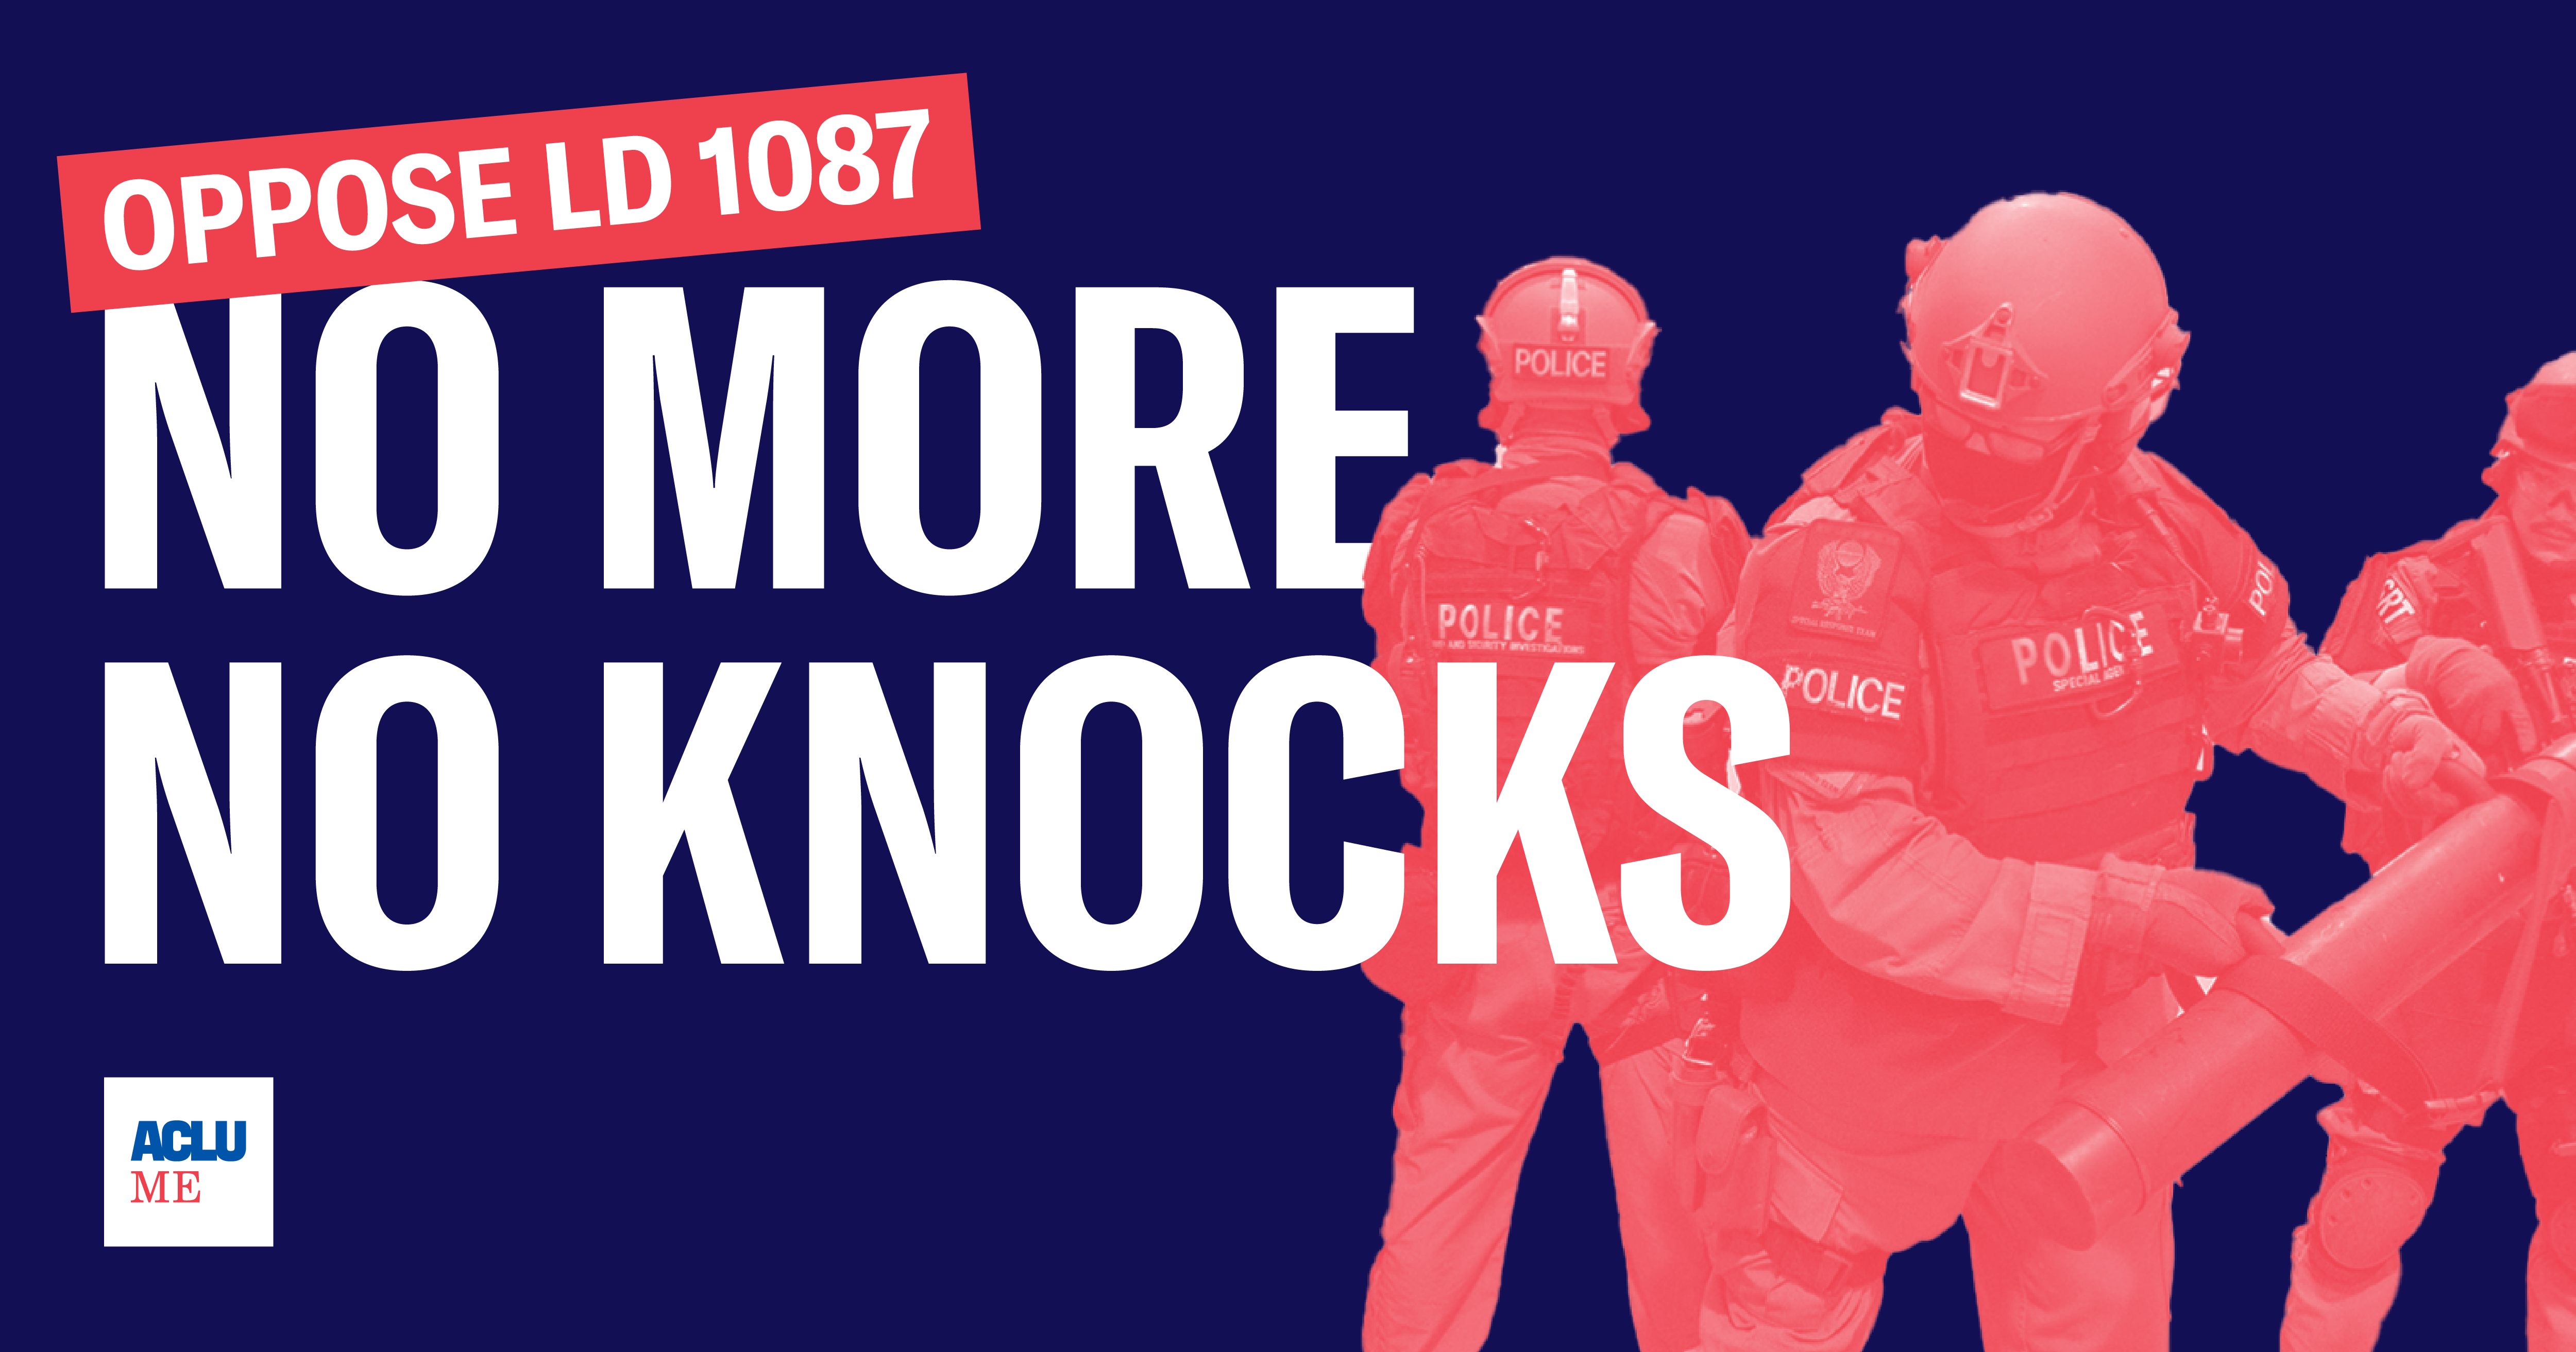 Blue background with white lettering reading "no more no knocks" and police officers in red on the right.